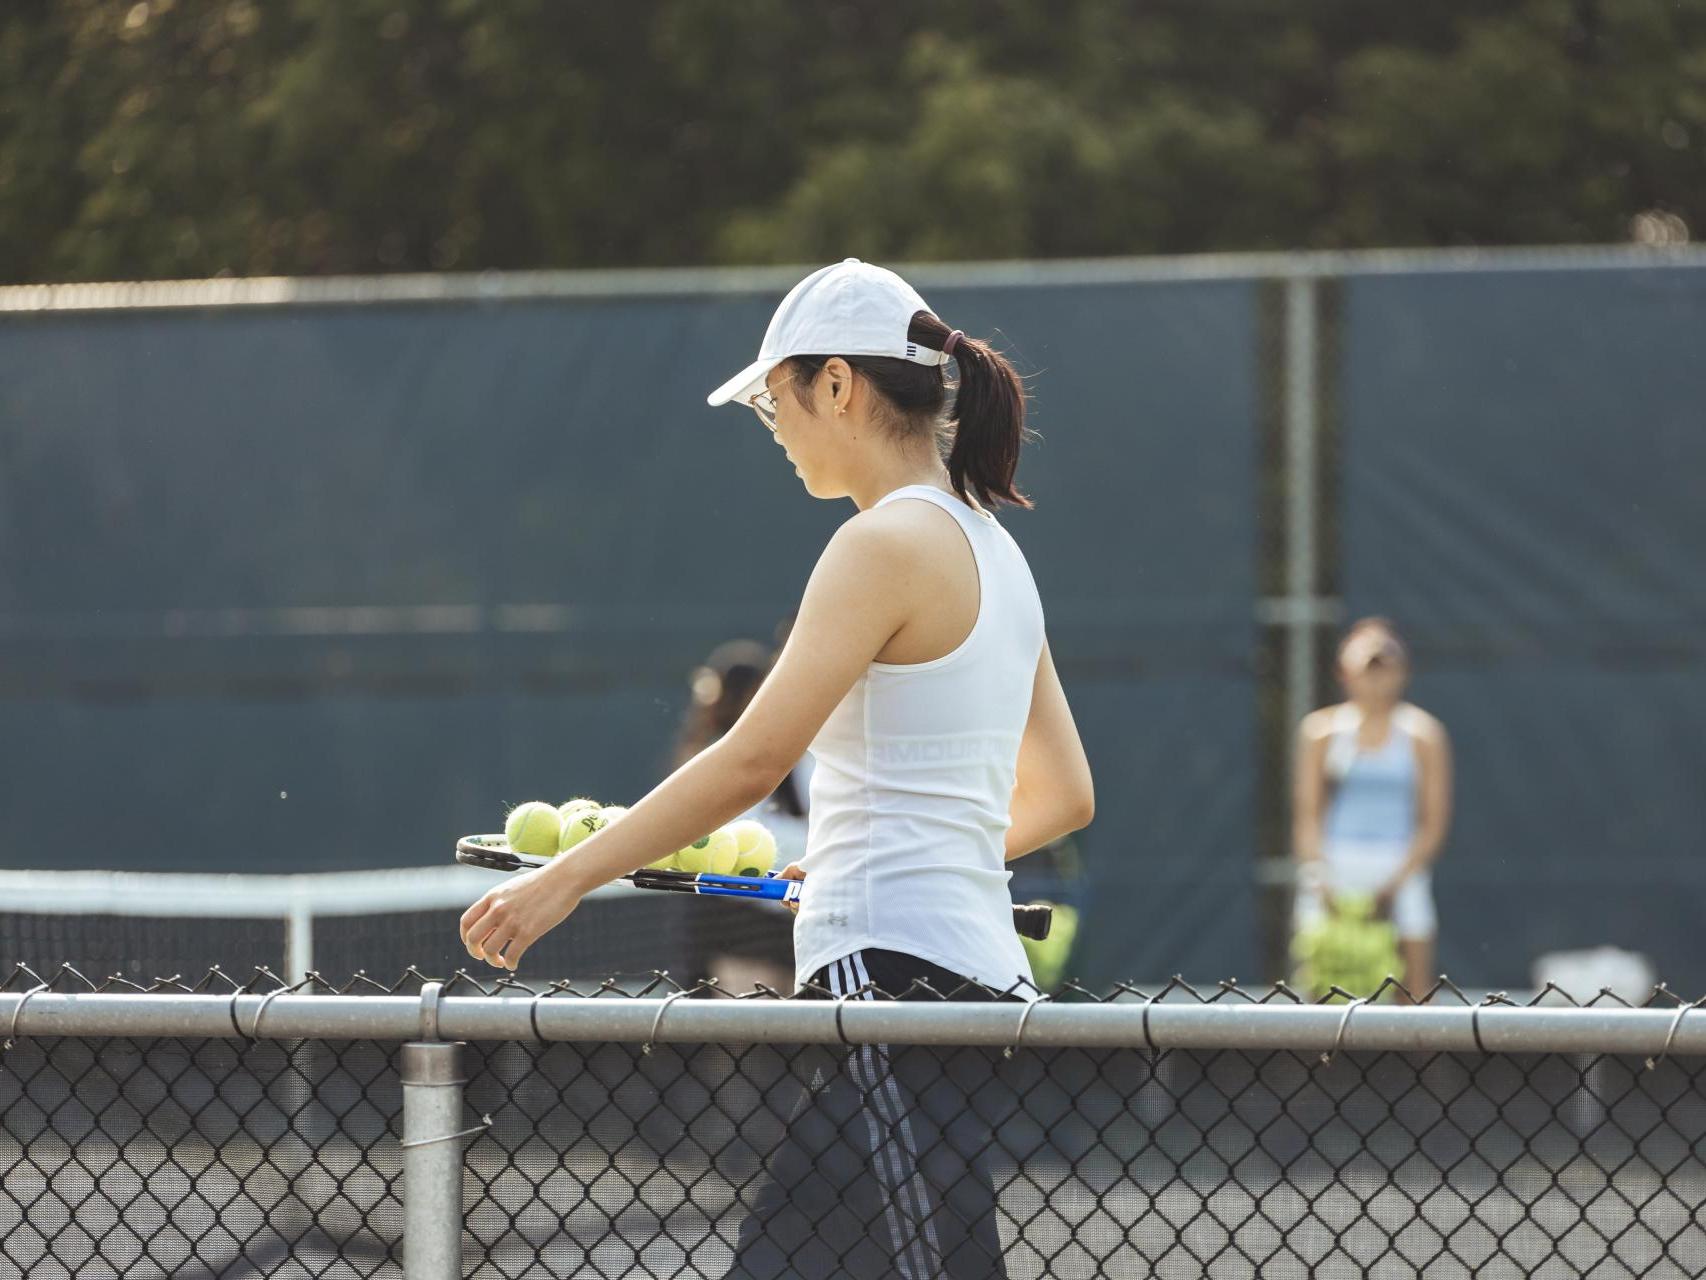 student playing tennis.